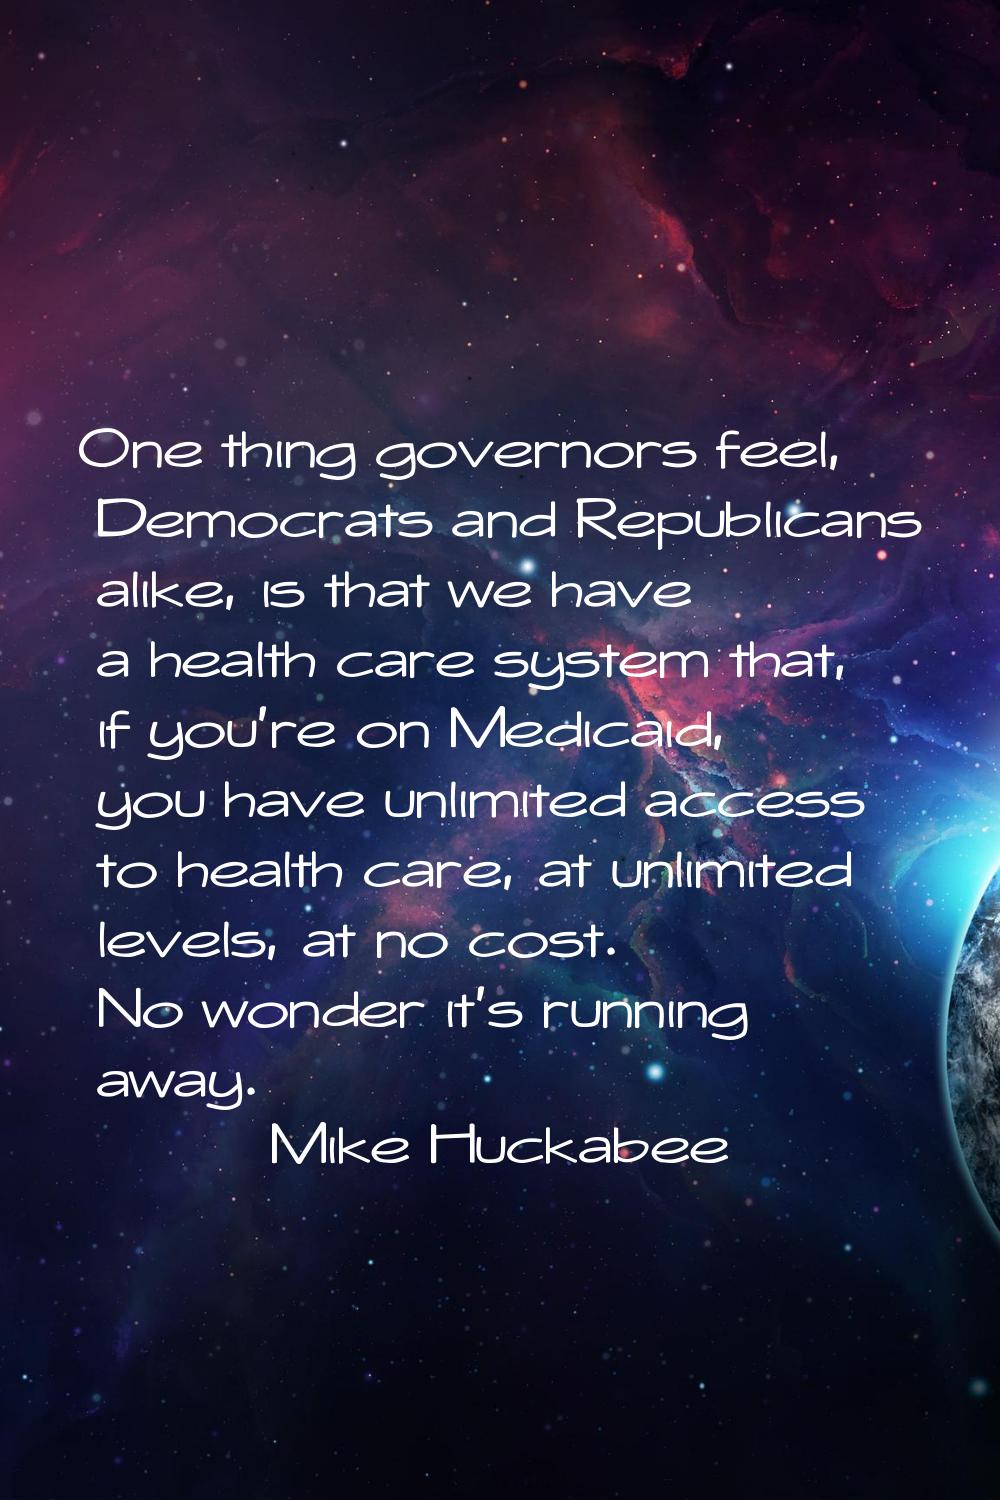 One thing governors feel, Democrats and Republicans alike, is that we have a health care system tha